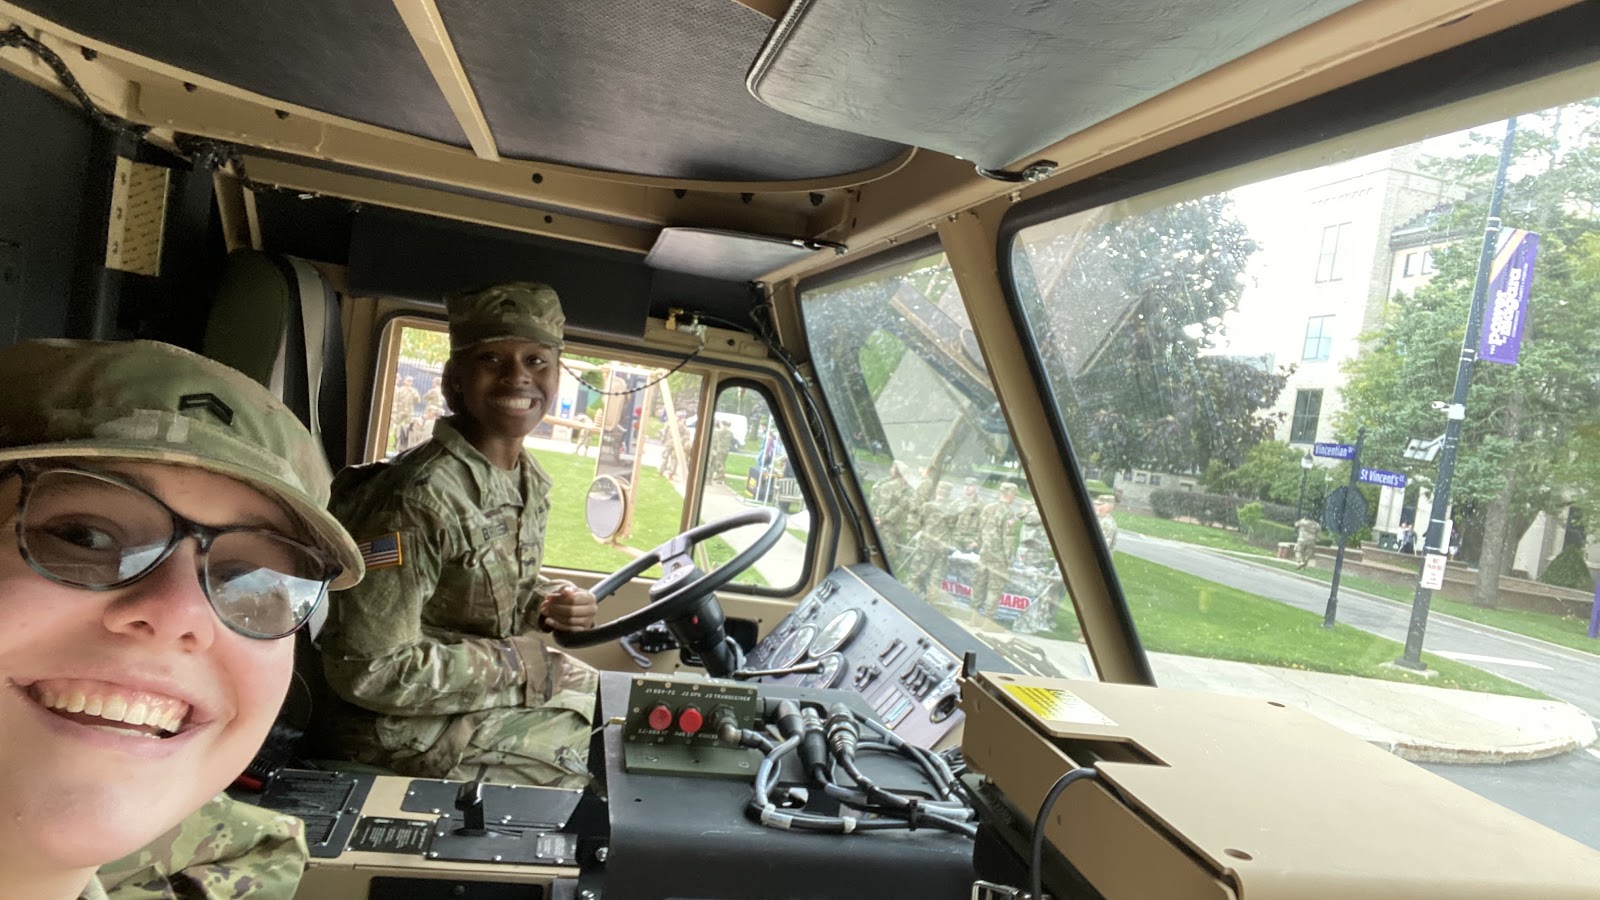 Cadets in a military vehicle during their military careers lab.